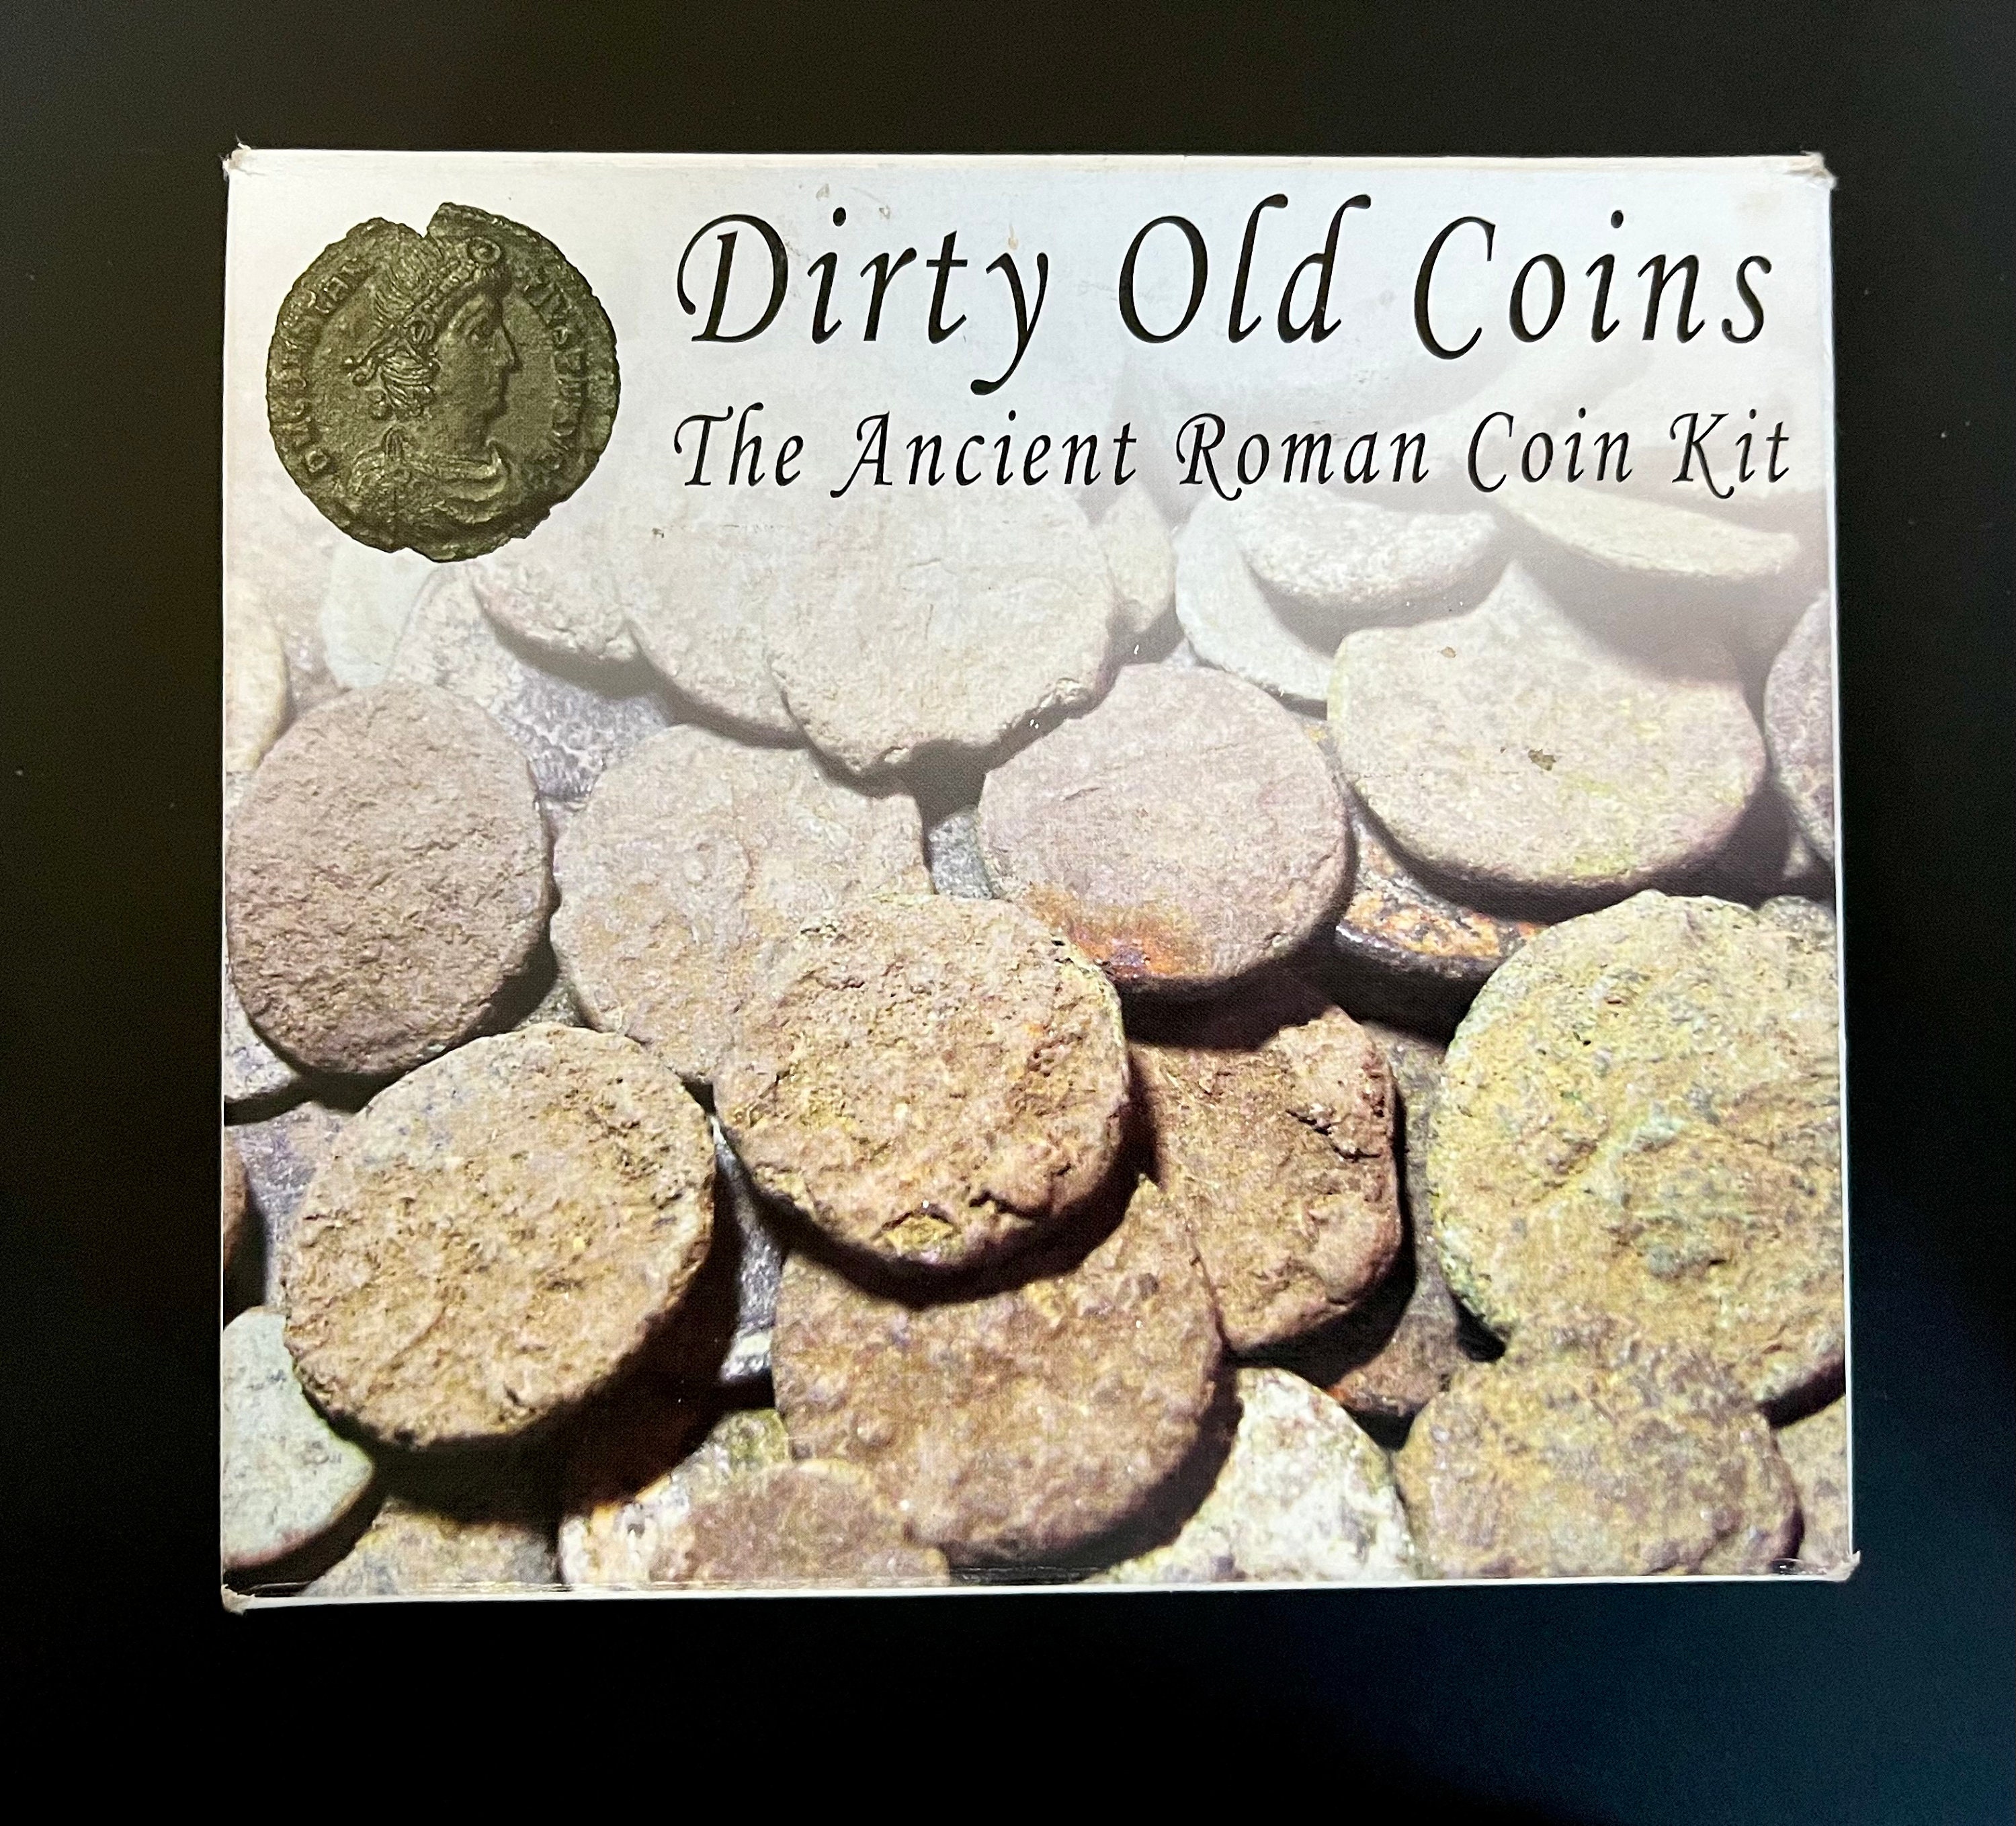 Dirty Old Coins A Kit for Cleaning and Identifying Old Roman Coins